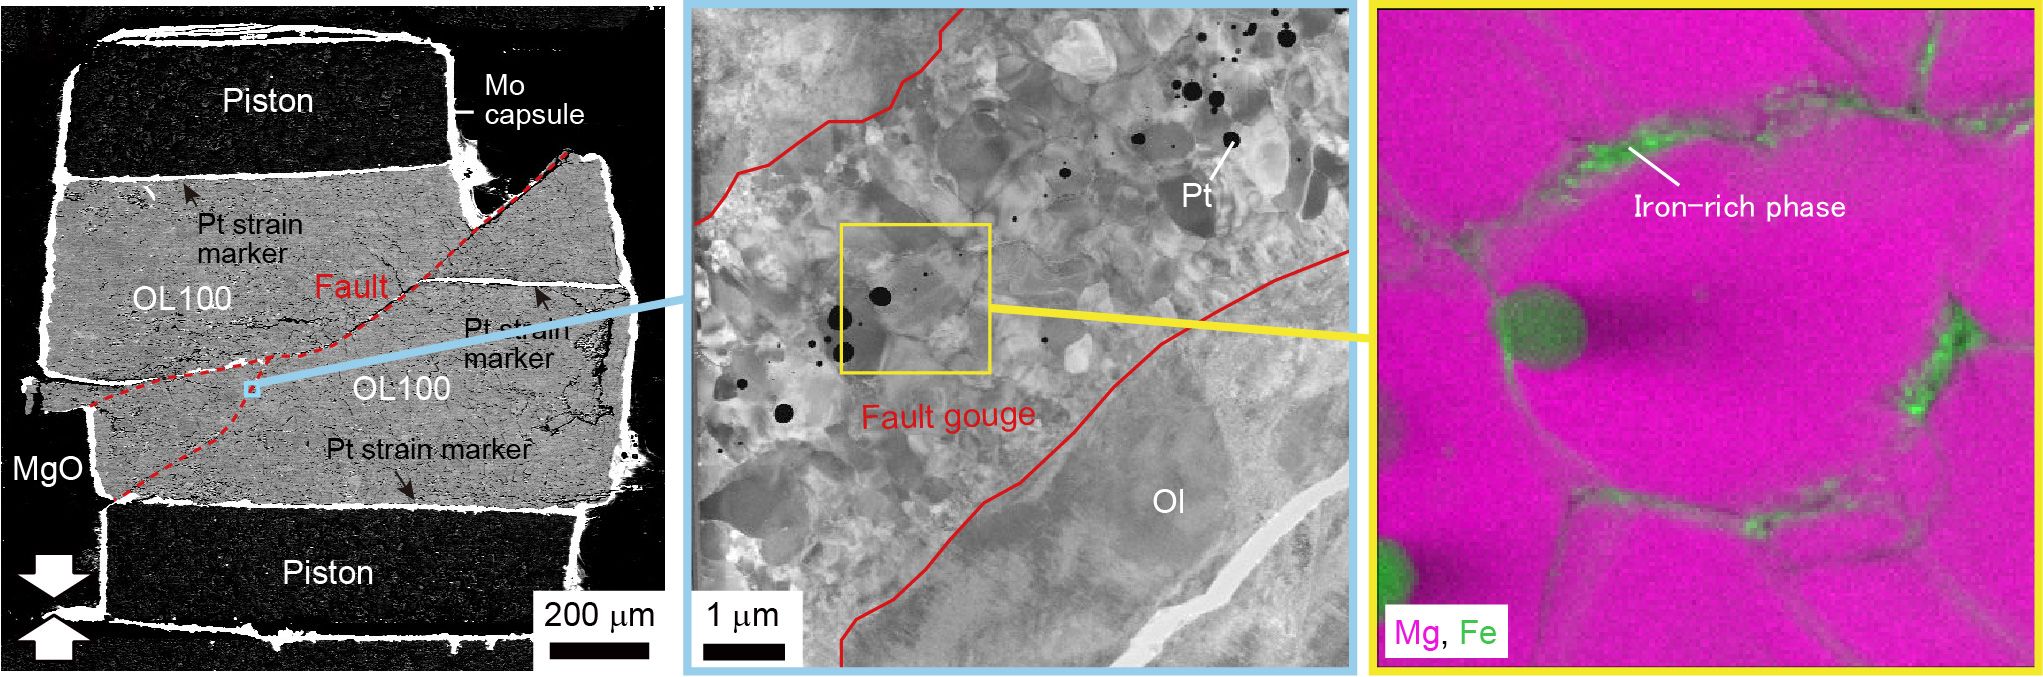 Faults developed in the olivine aggregate deformed at 15.5 GPa and 850 ºC